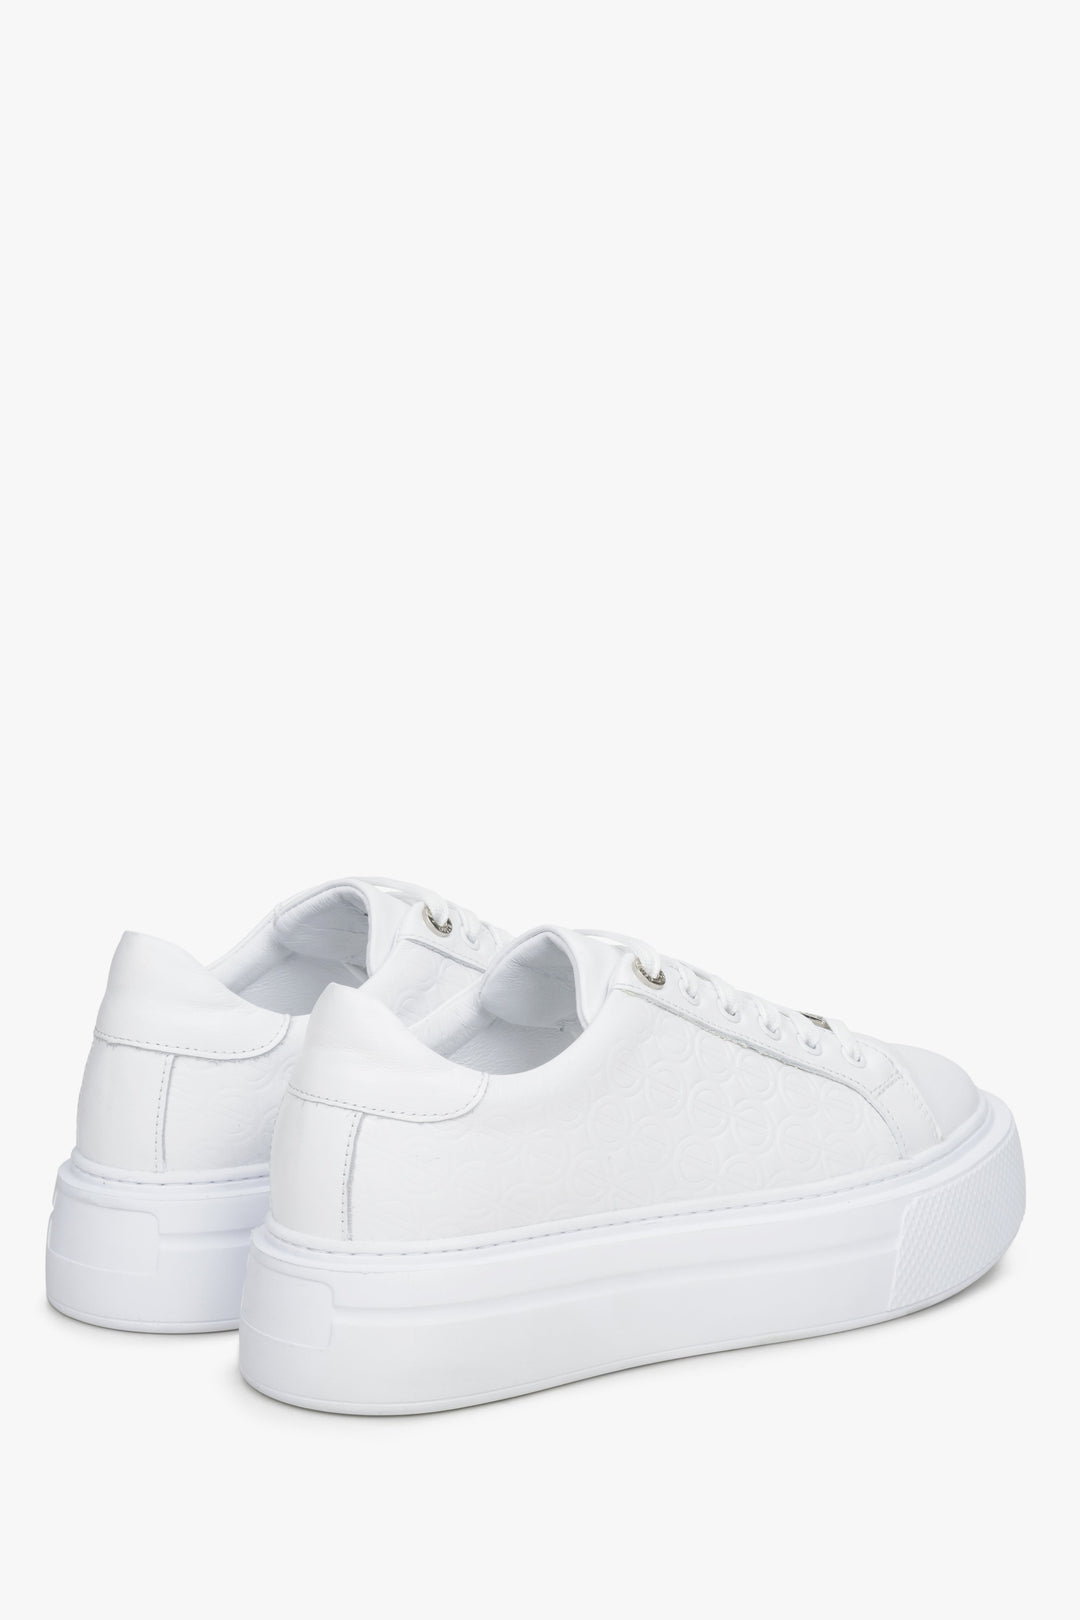 Women's white  leather sneakers by Estro - close-up on the side line and heel counter.